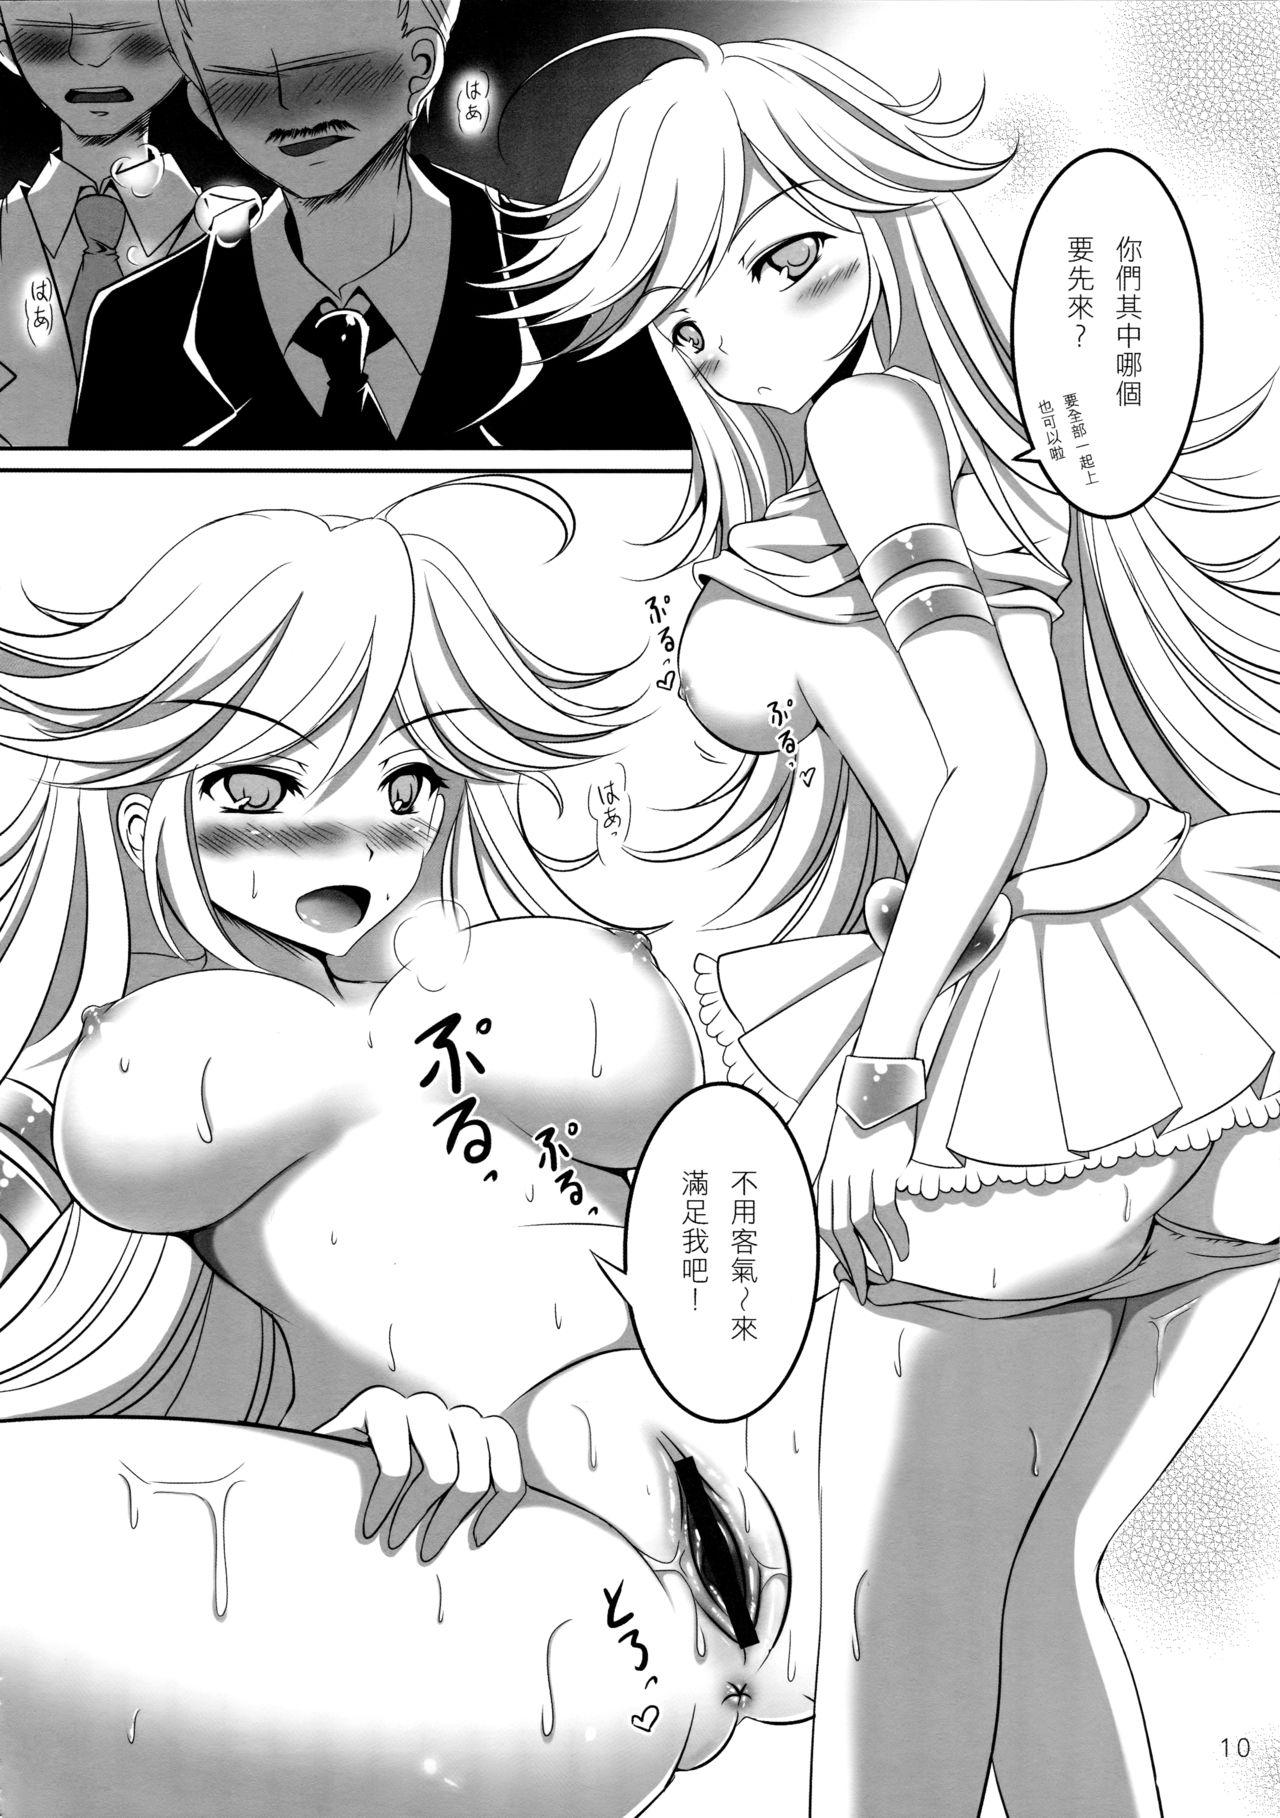 Desperate Angel Bitches! - Panty and stocking with garterbelt Bangla - Page 10